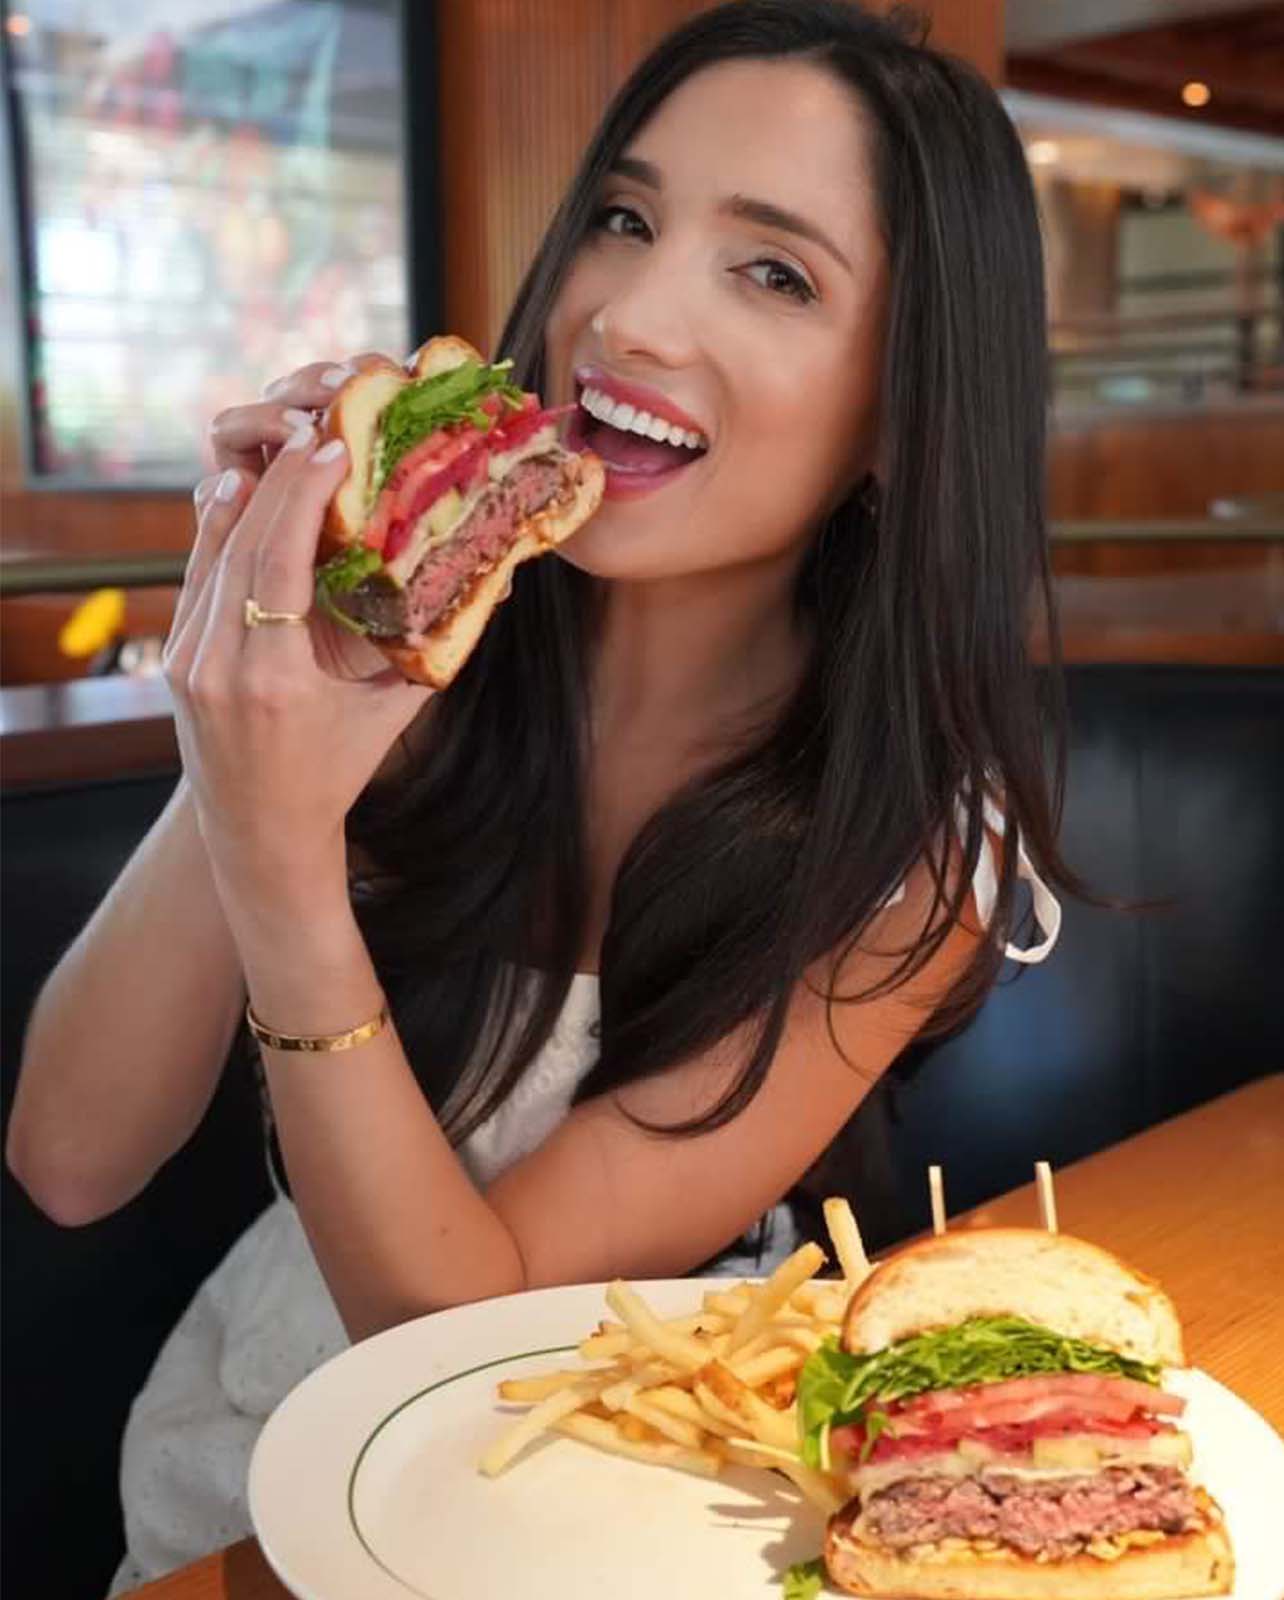 Woman smiles while holding up a cheeseburger